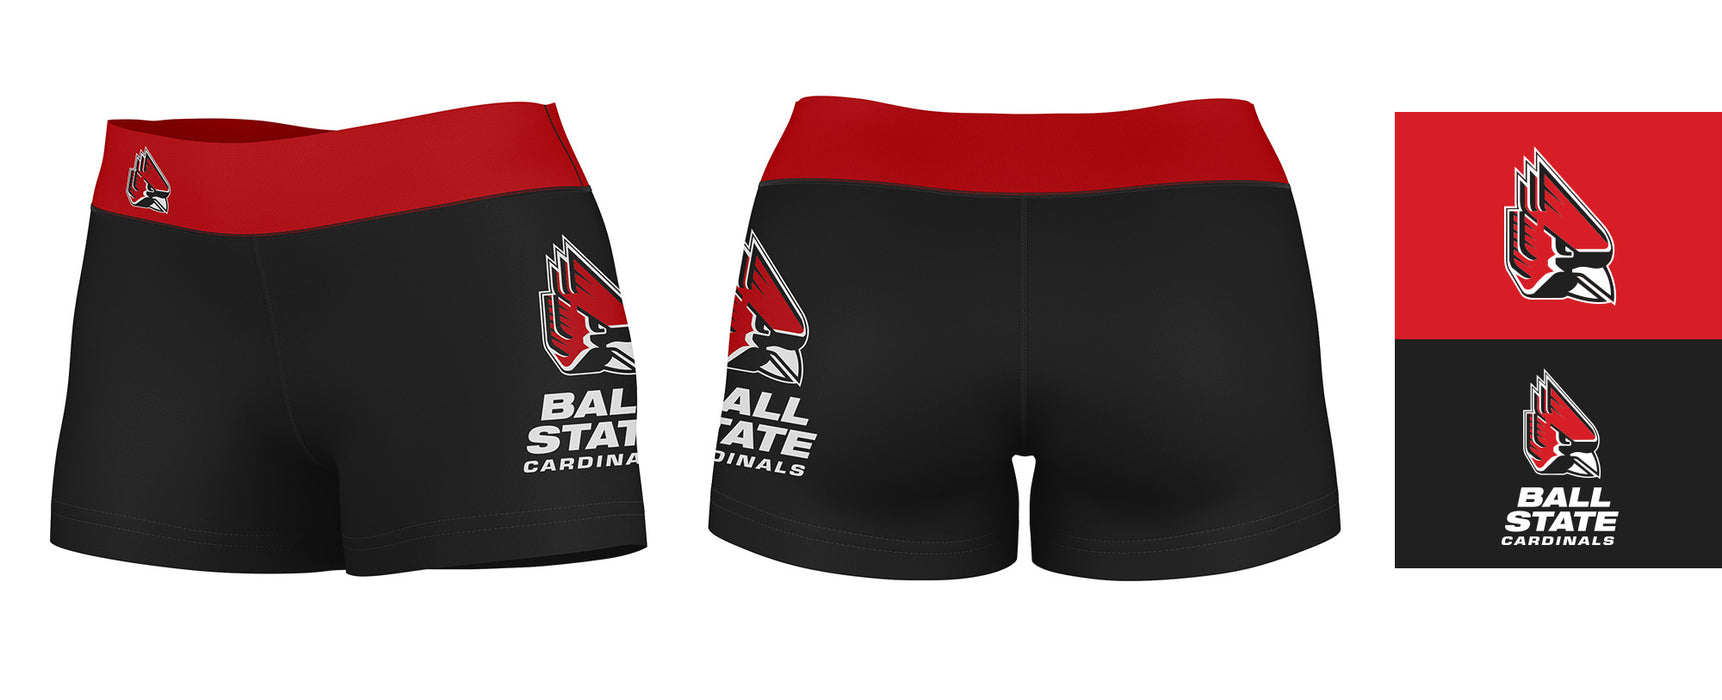 Ball State Cardinals Vive La Fete Logo on Thigh and Waistband Black & Red Women Yoga Booty Workout Shorts 3.75 Inseam" - Vive La Fête - Online Apparel Store